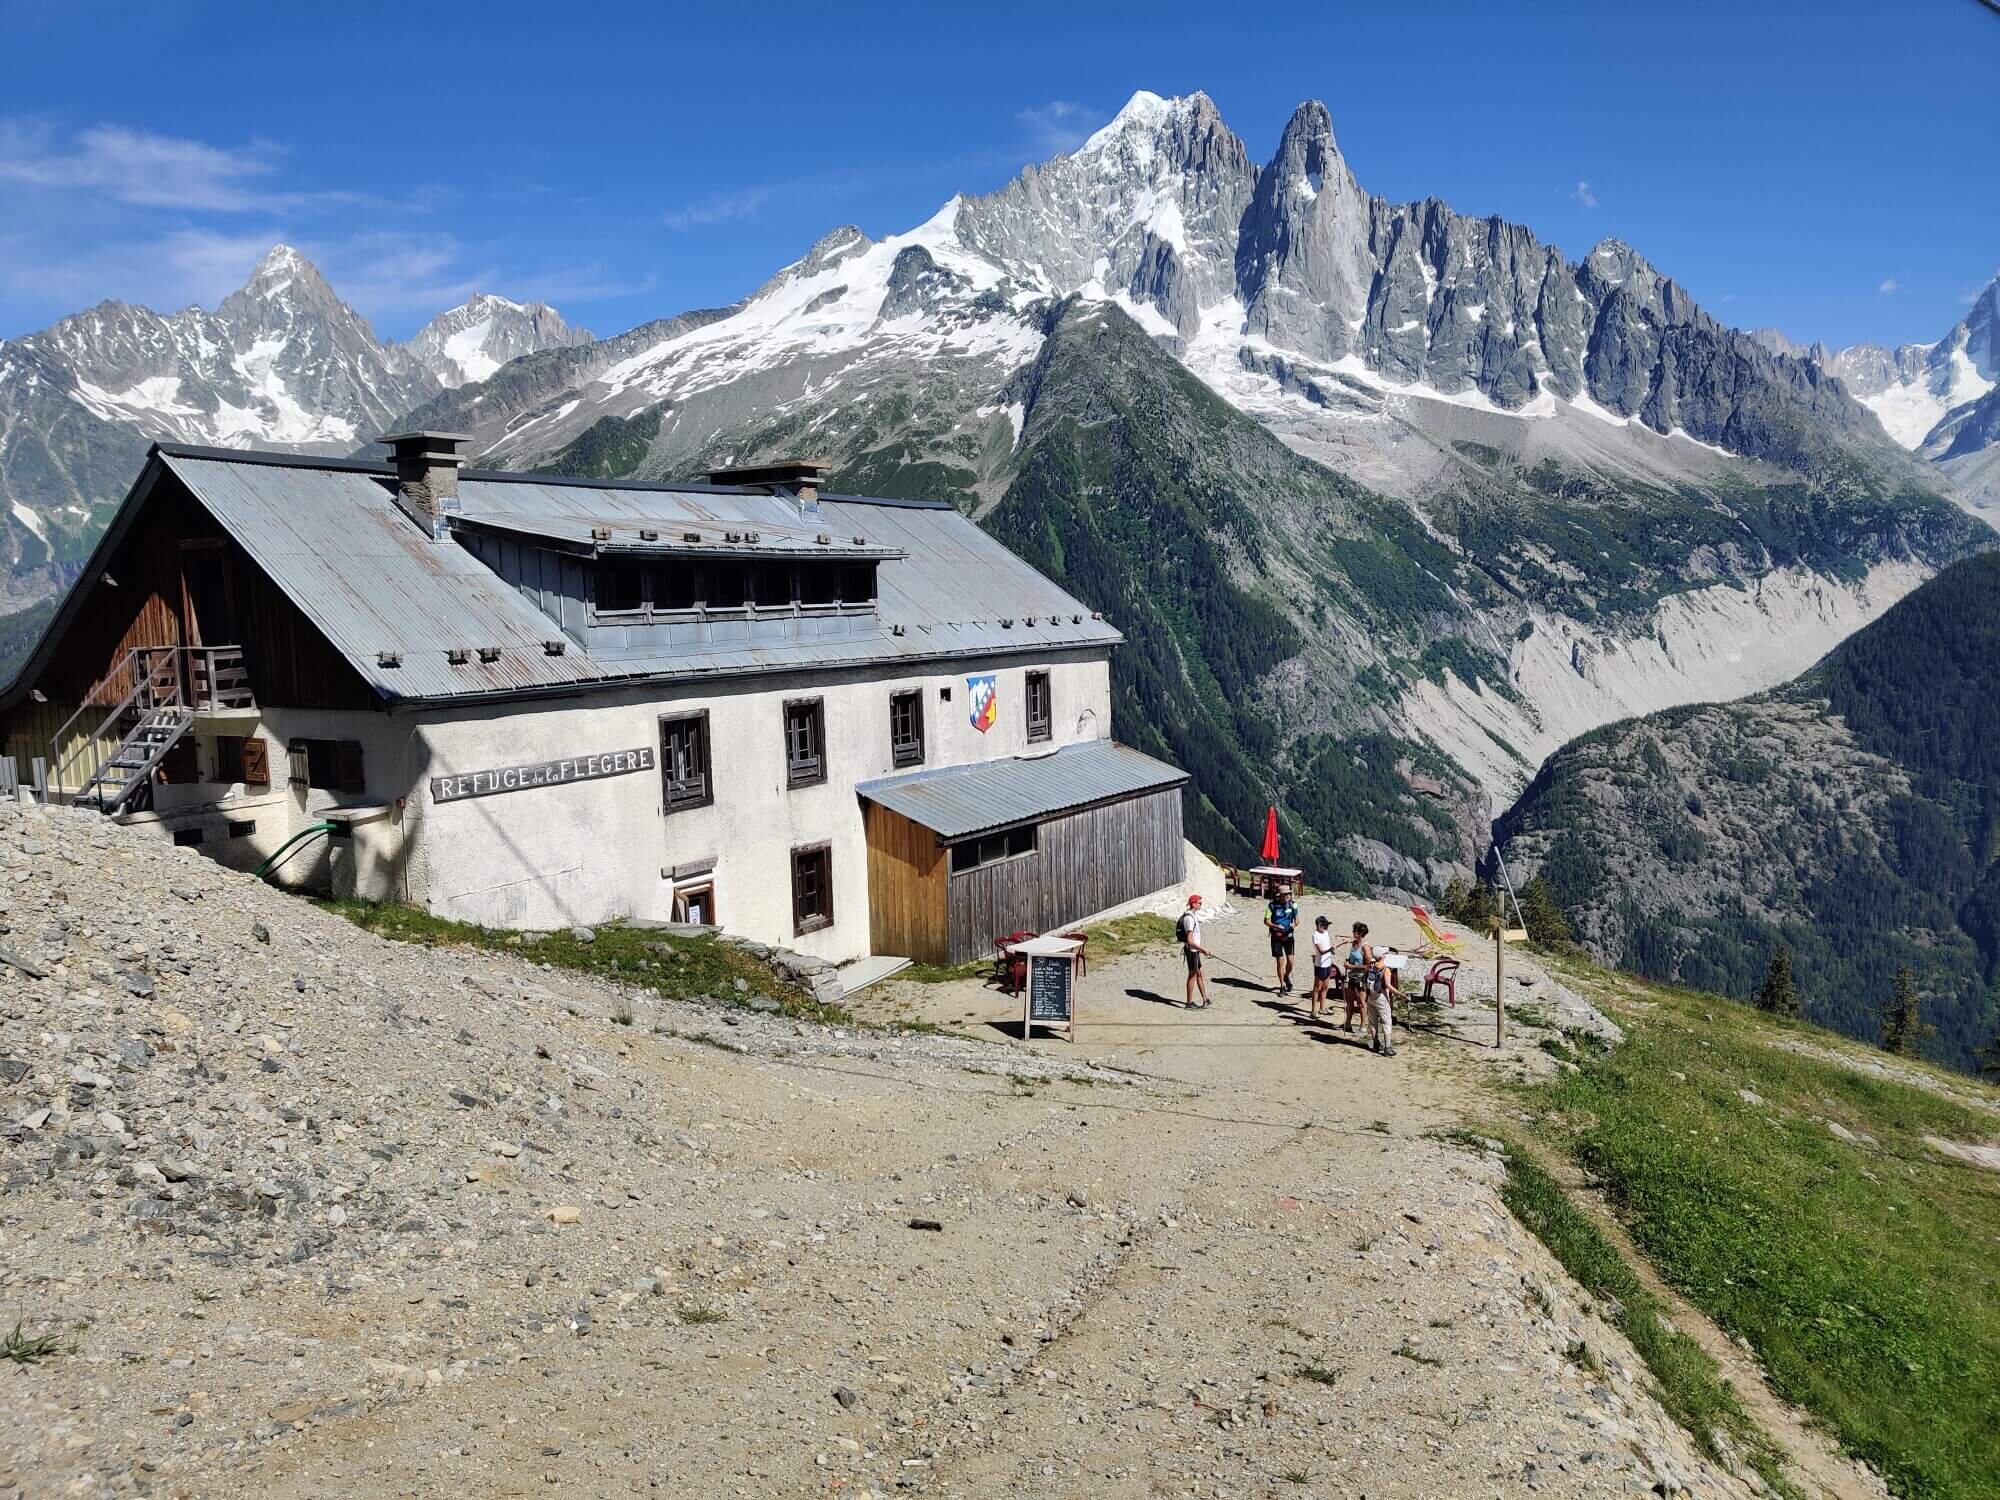 Refuge la Flégére - overlooking the Mont Blanc massif within the Chamonix Valley.